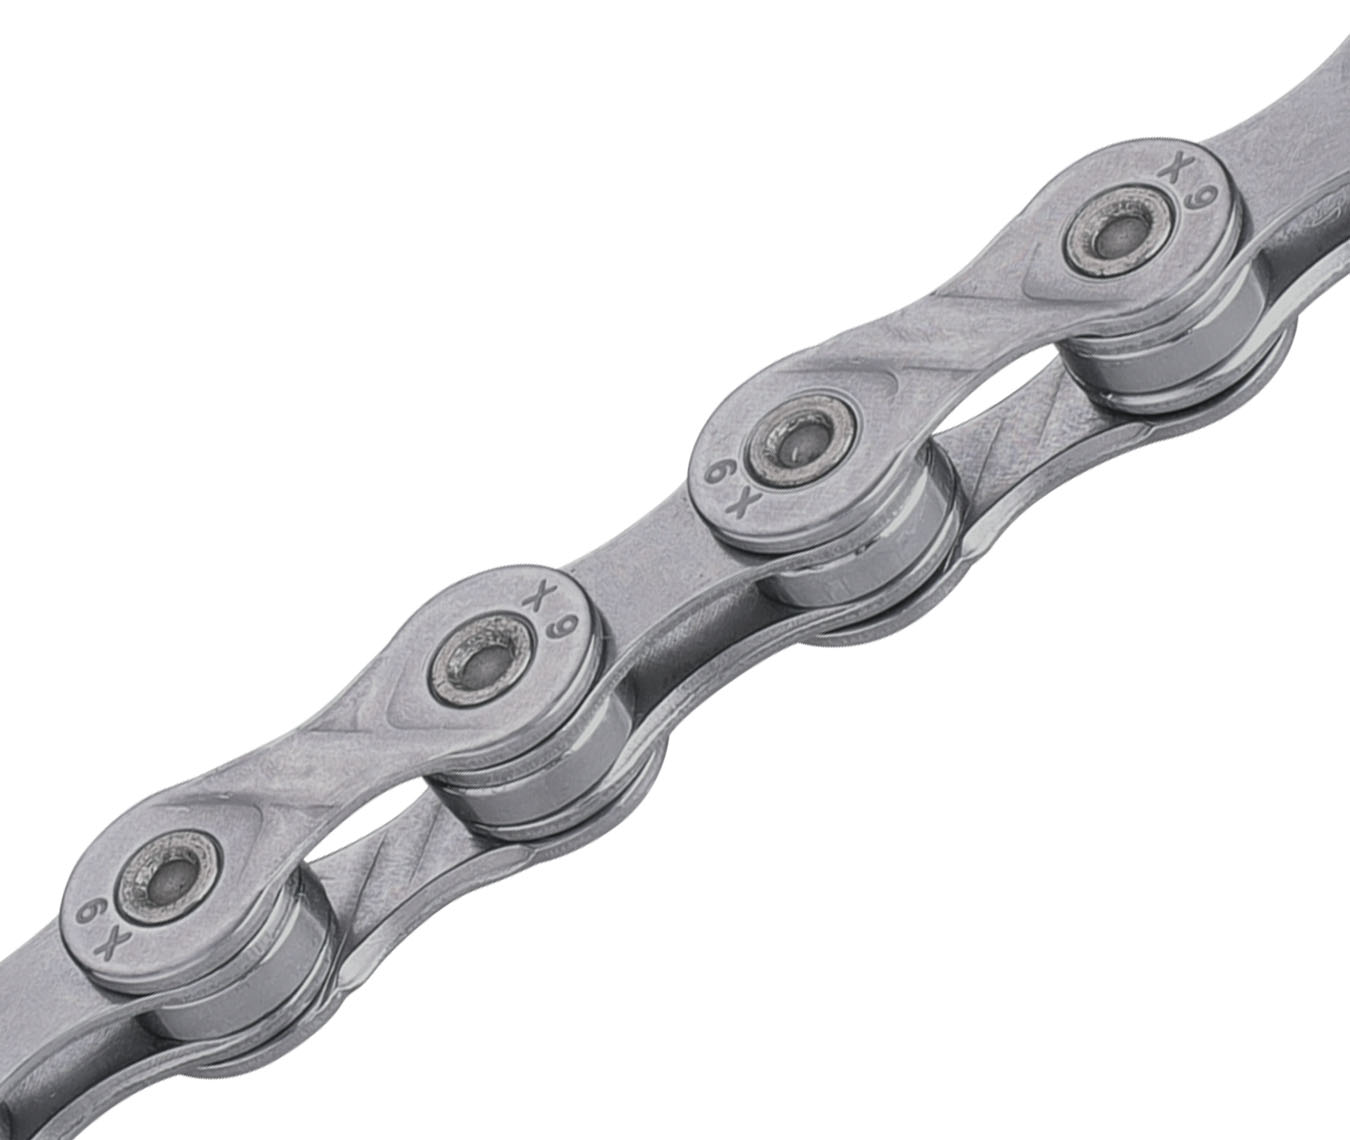 KMC X9L Bicycle Chain 116 Links 9 Speed Silver J&B Importers Inc 16558